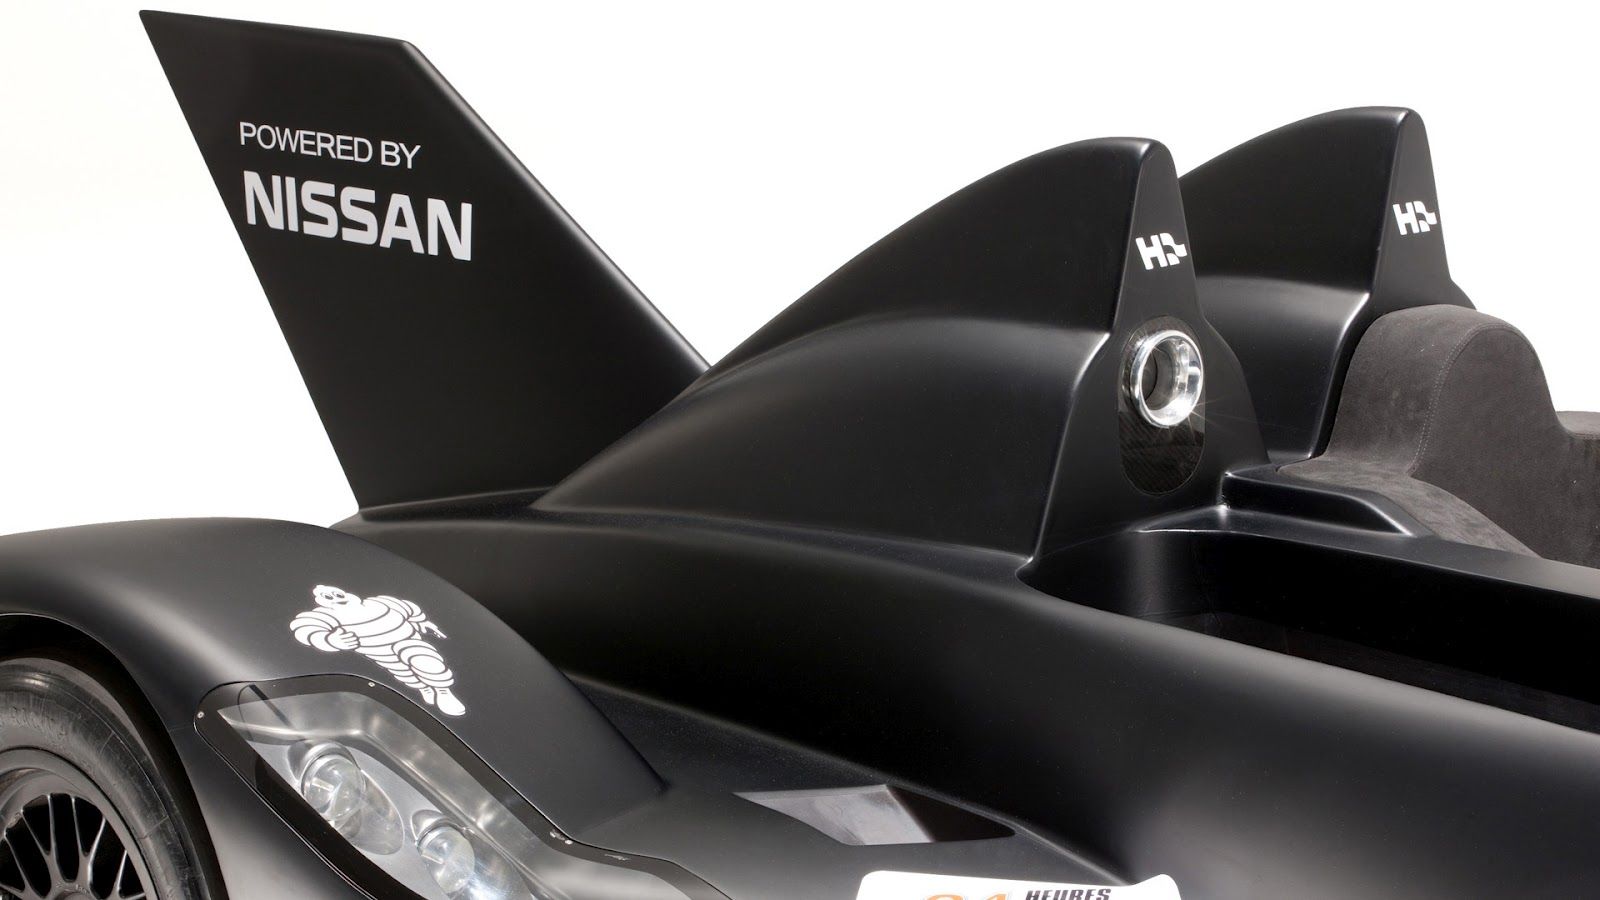 2012 Nissan Delta Wing Body (View 1 of 12)